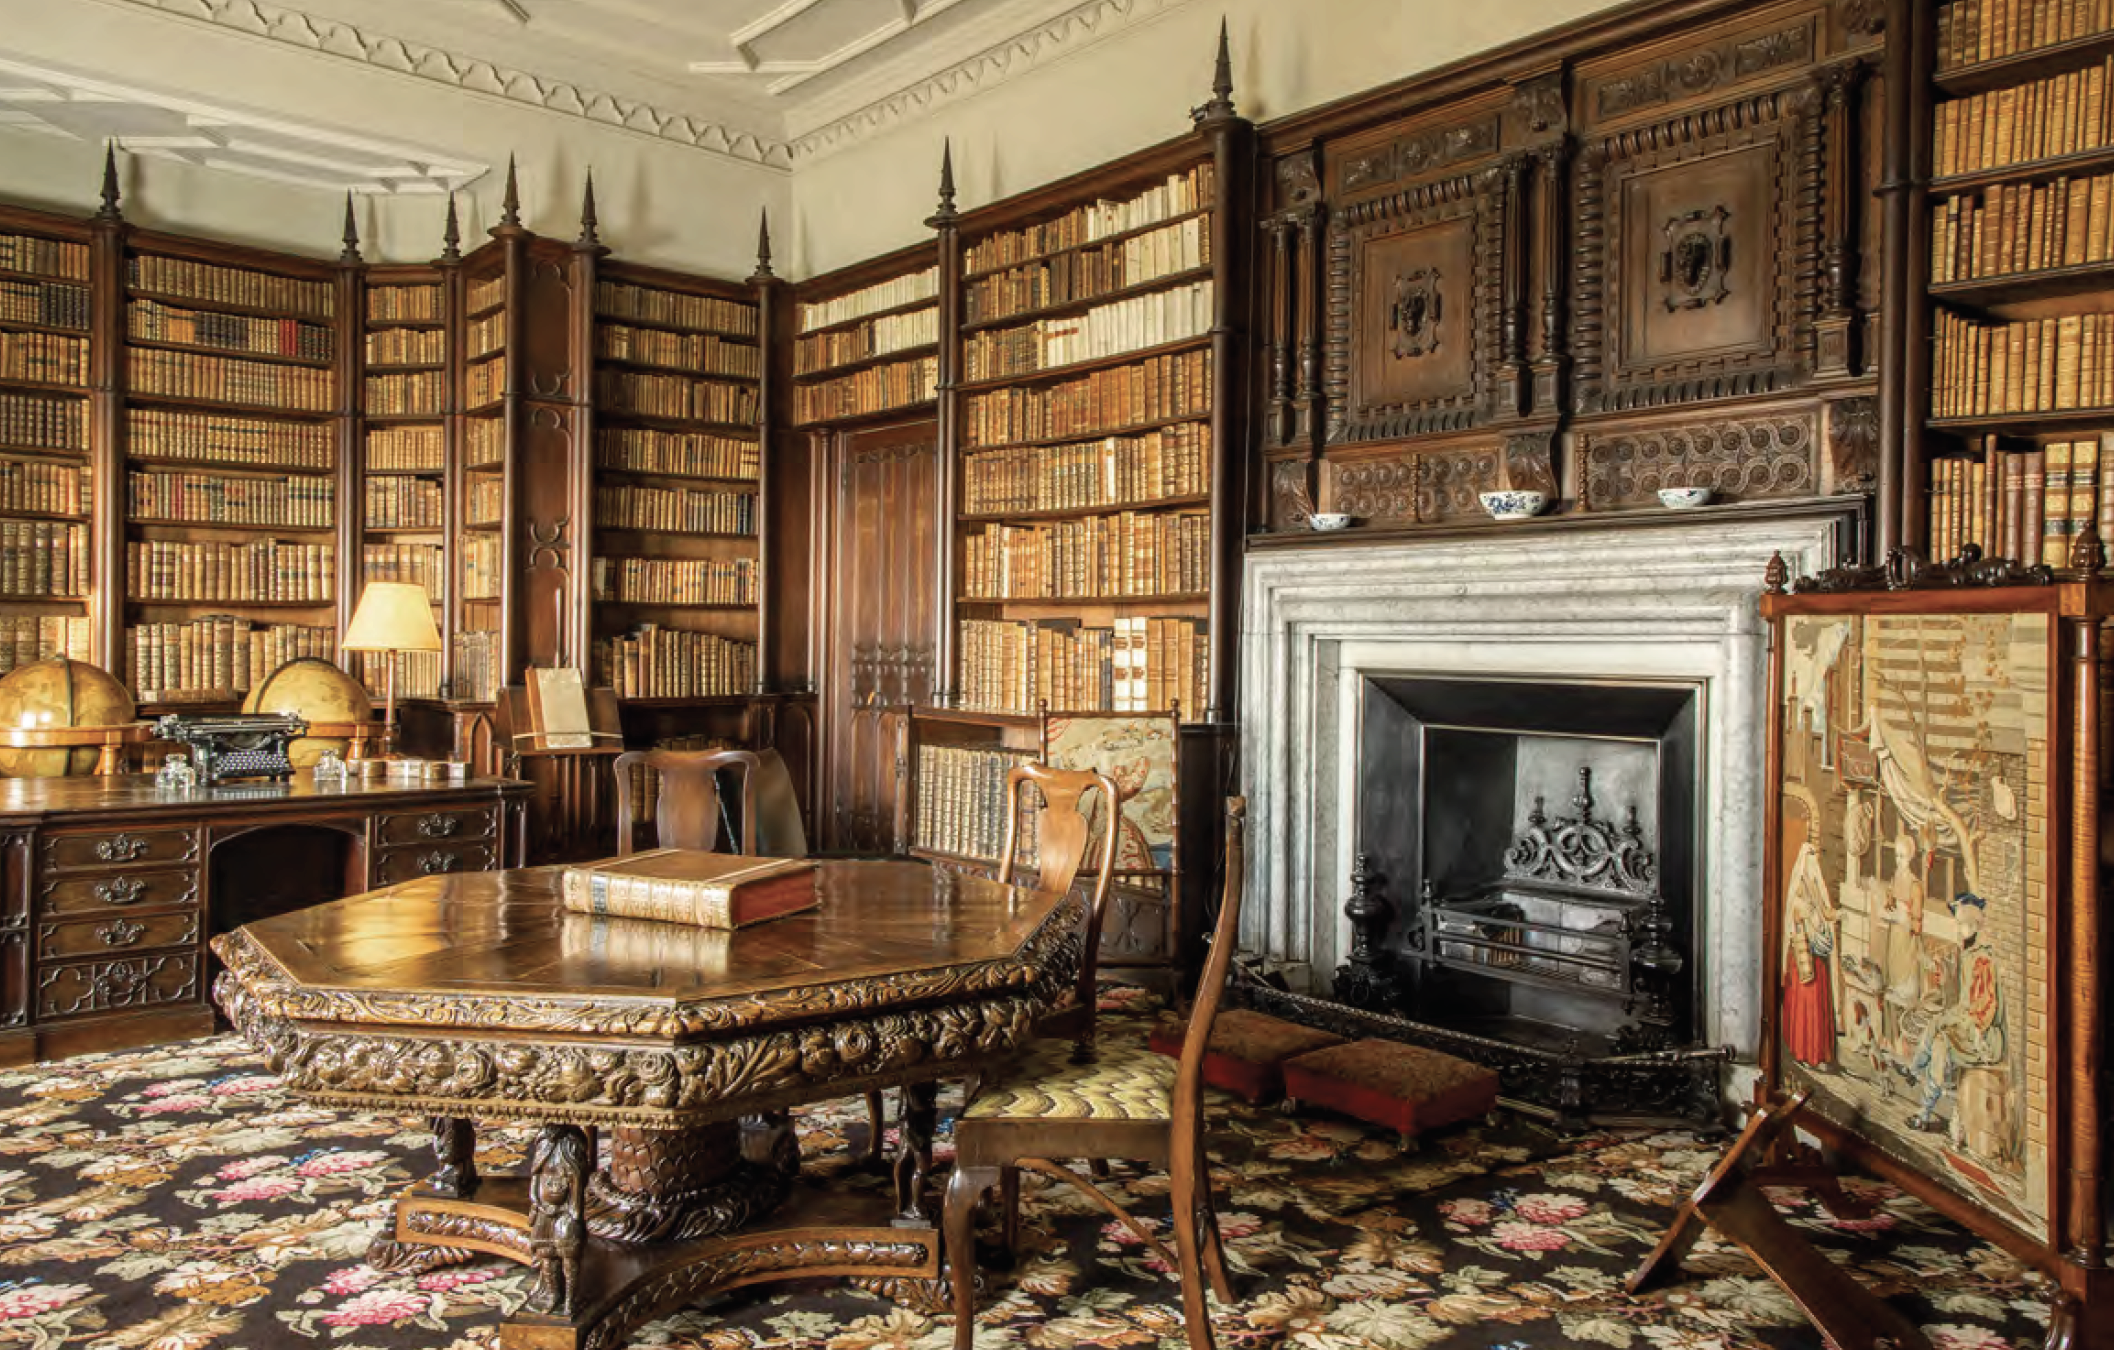 The Library at Felbrigg Hall, ©National Trust Images/Paul Bailey